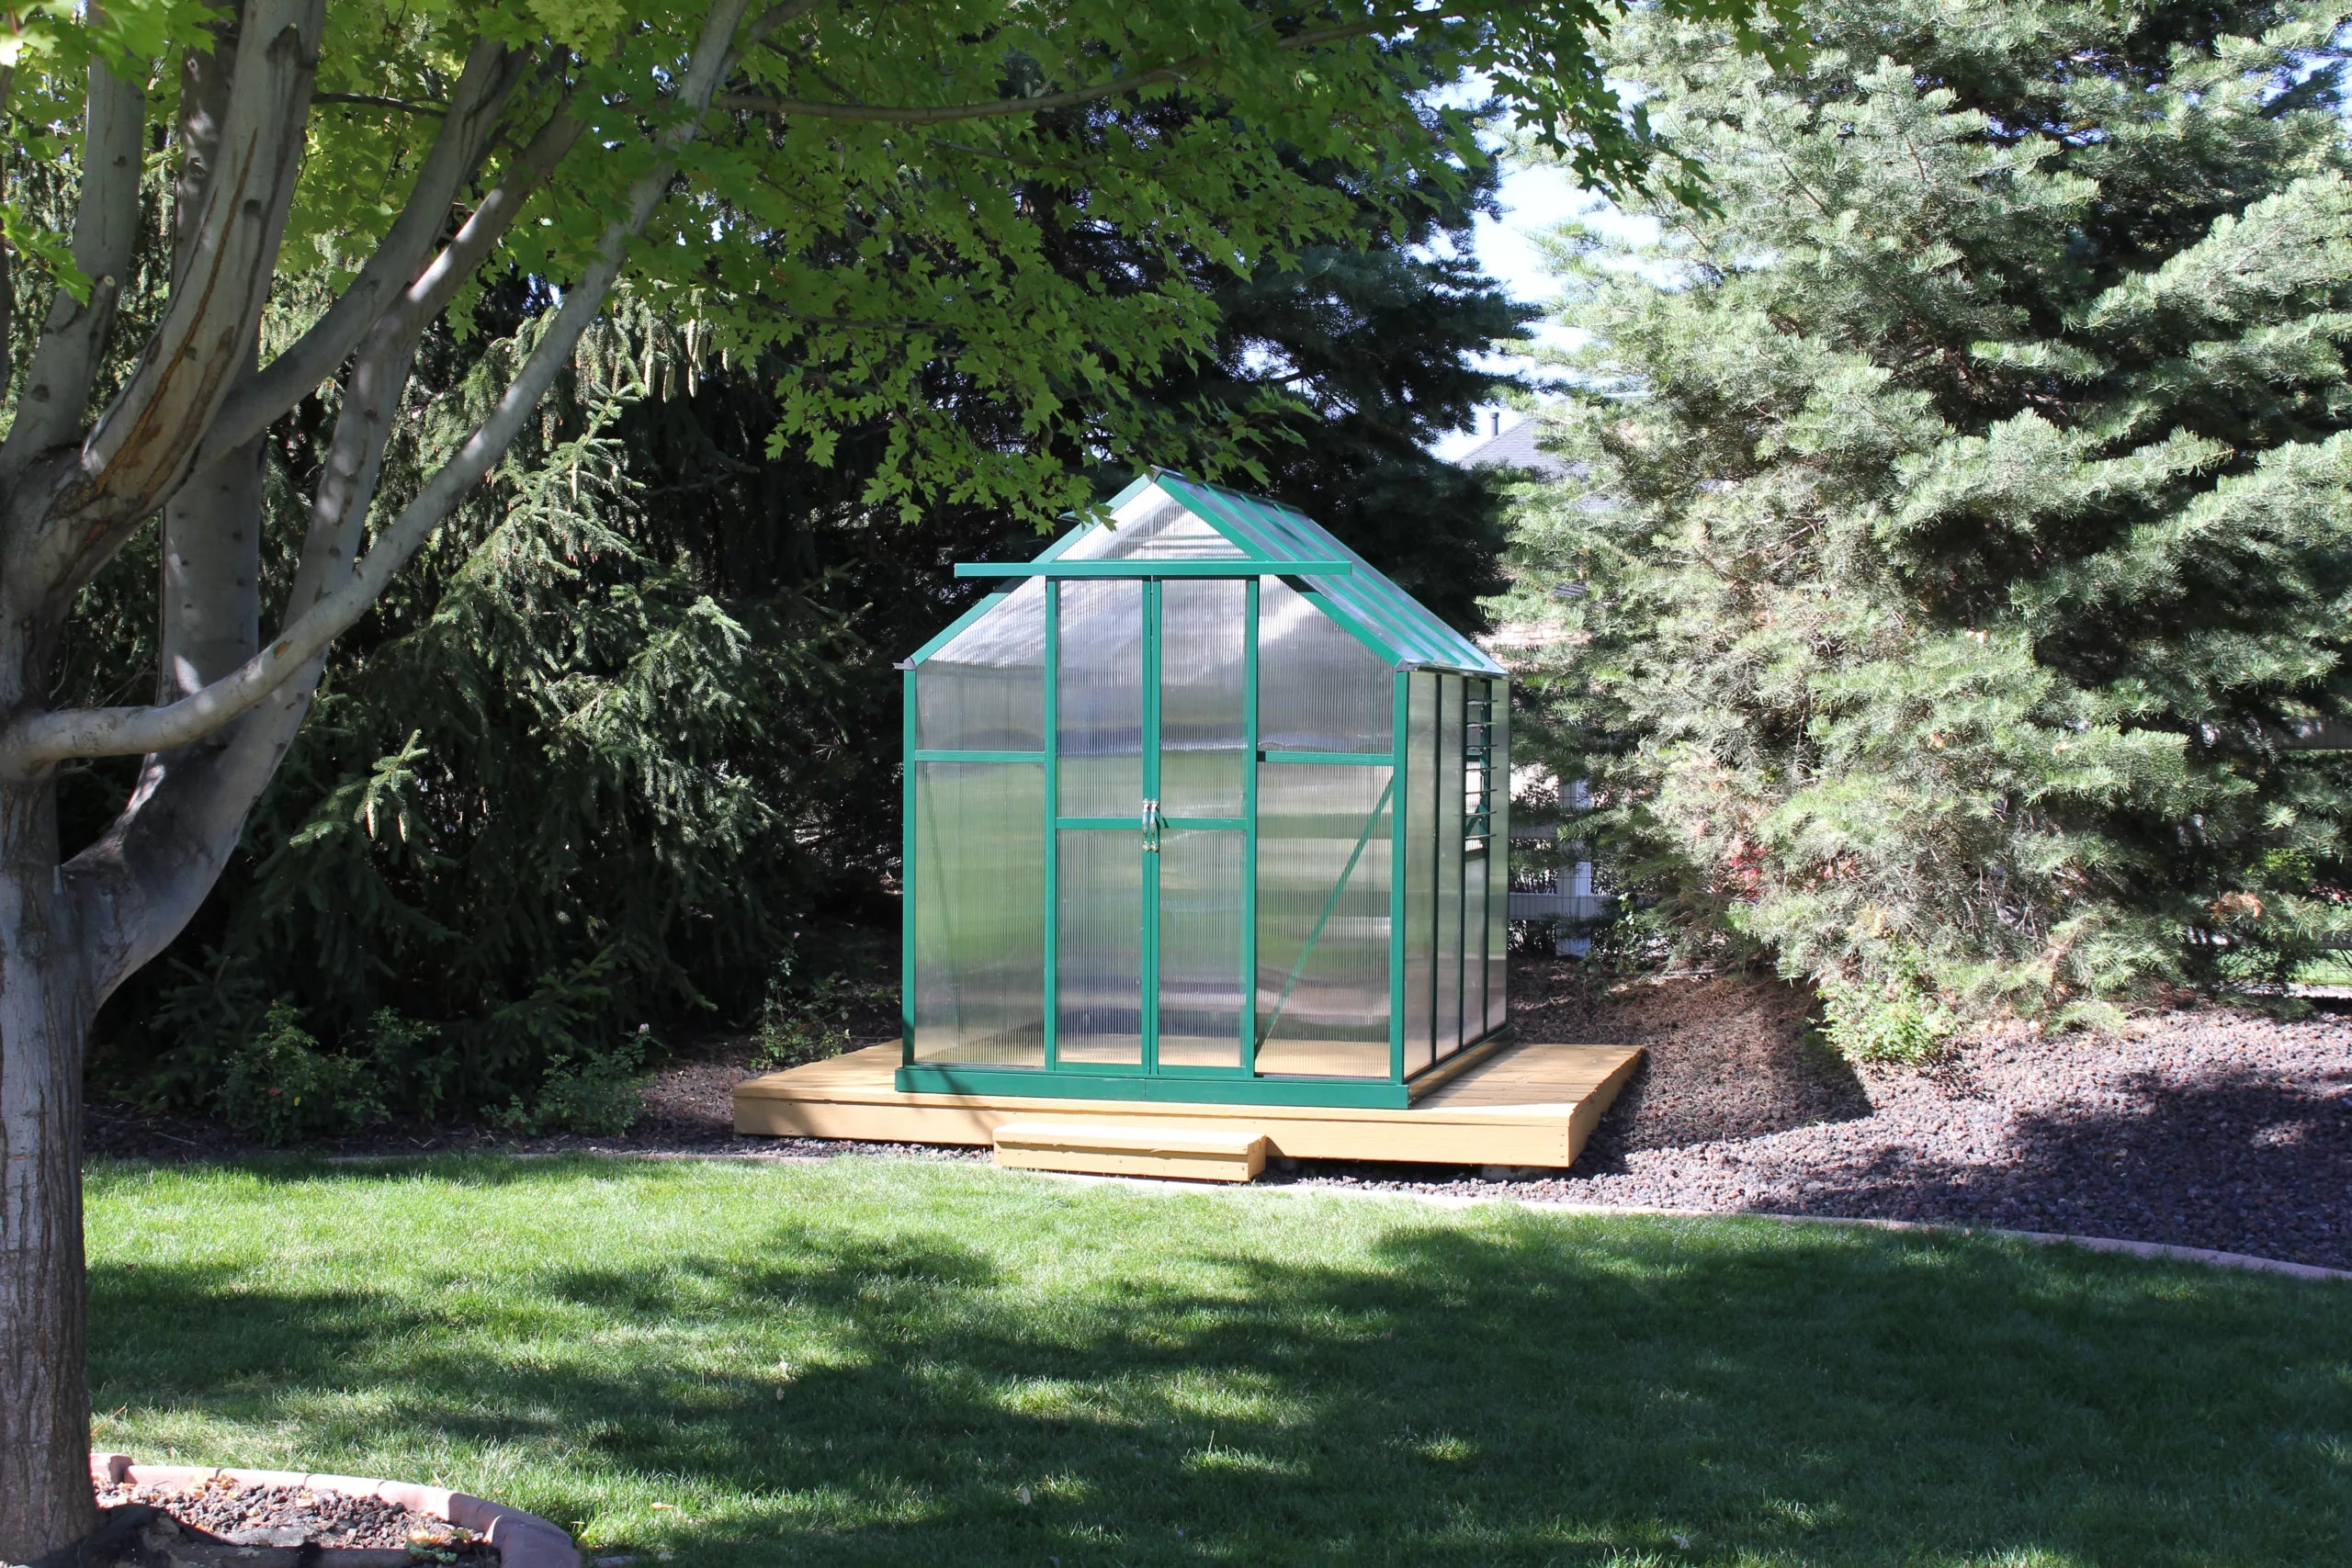 Frontal view of Grandio Element 6x8 greenhouse on a wooden deck, highlighting the spacious entry and peak roof design.